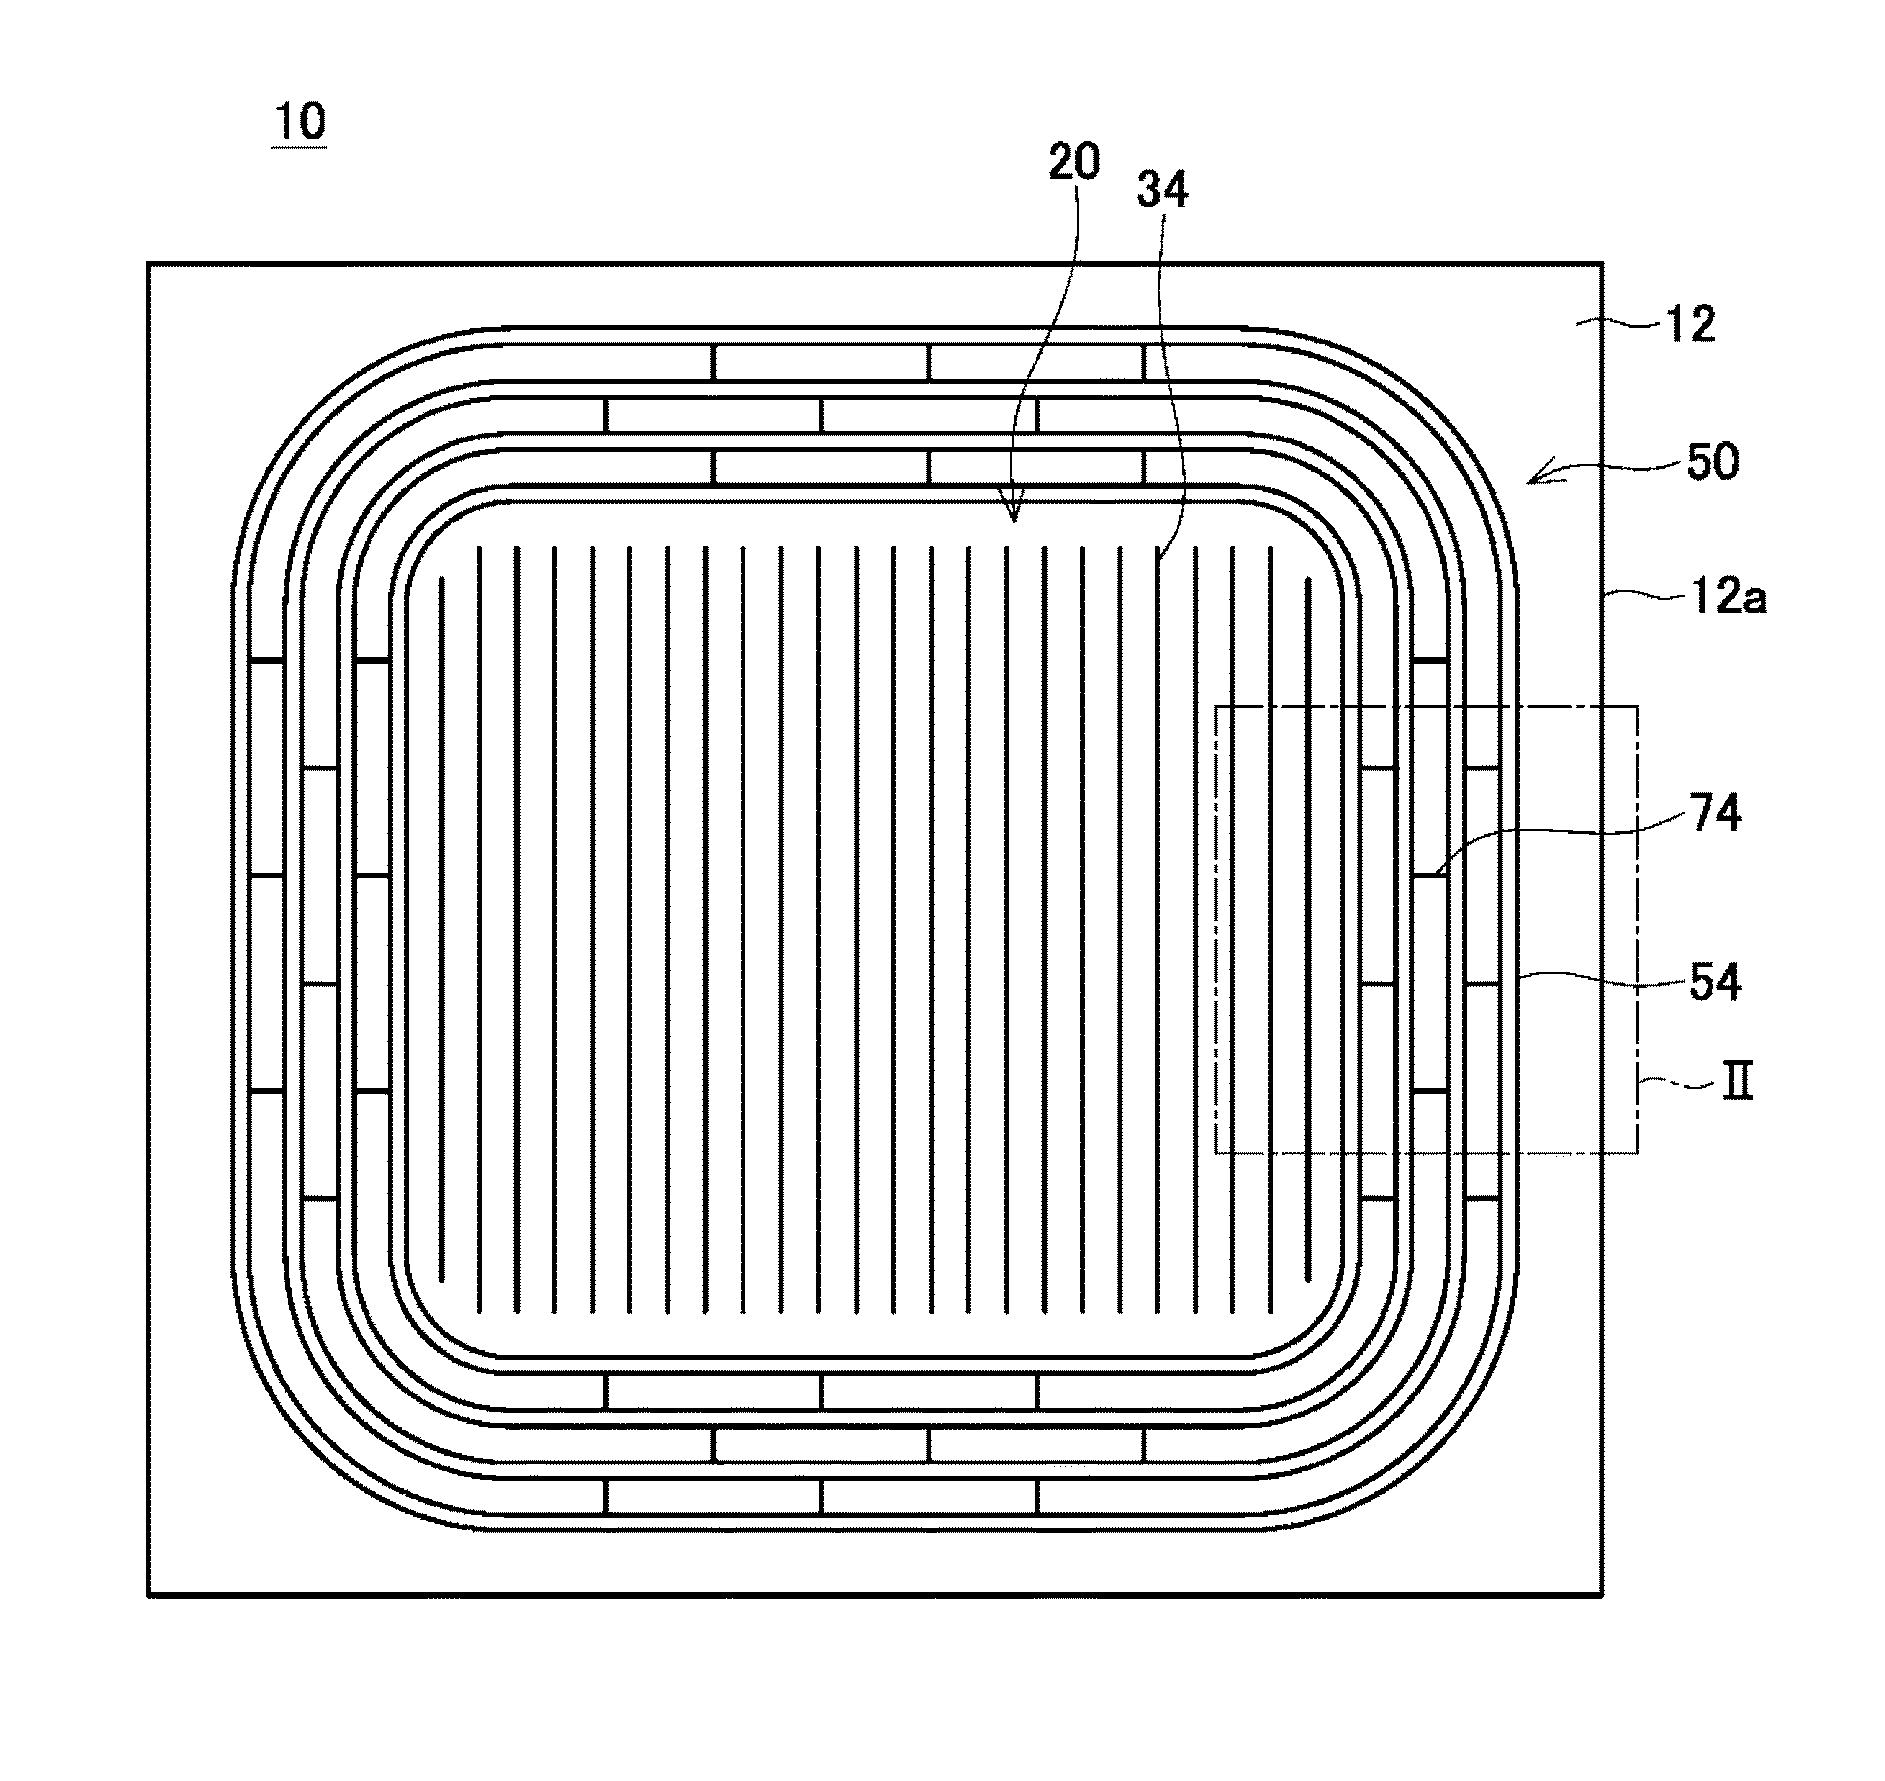 Insulated gate type semiconductor device